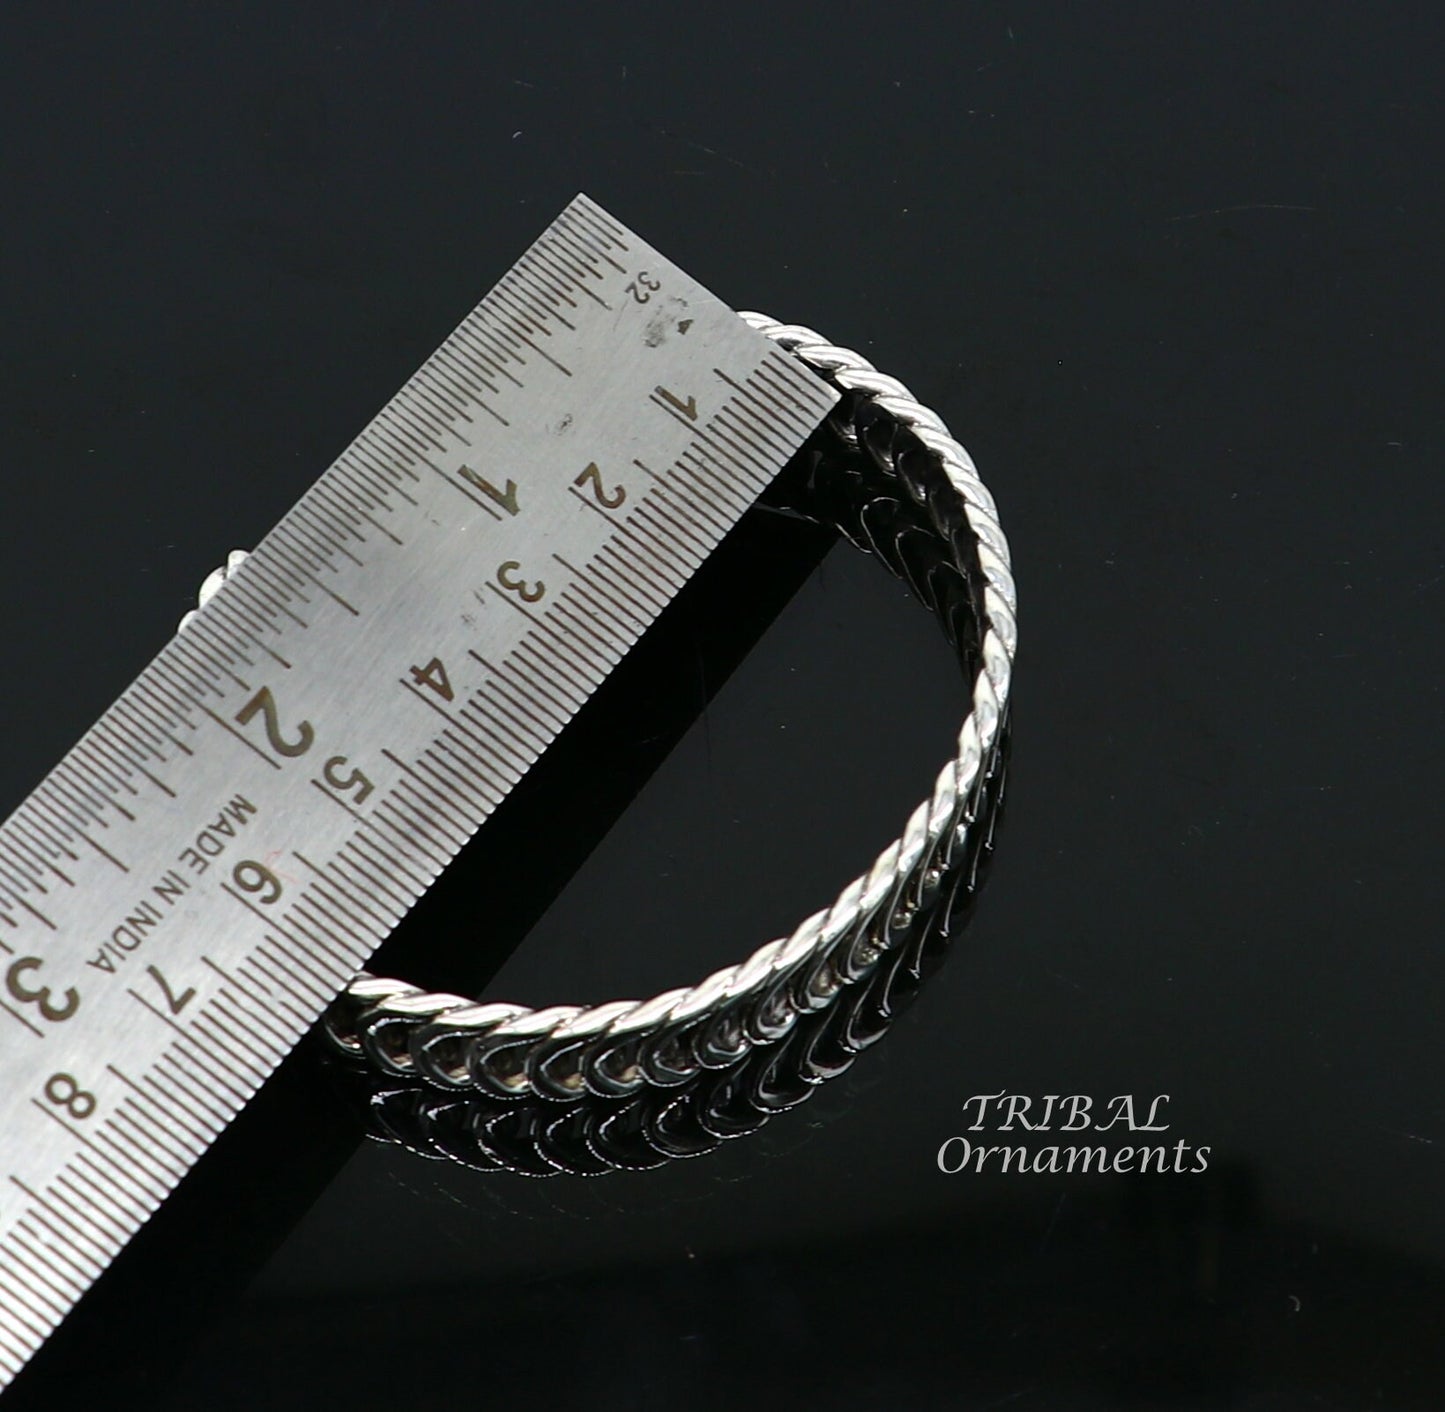 Vintage unique design stylish cuff kada adjustable bracelet, 925 sterling silver wrist jewelry for boy's and girl's, best gifting  cuff108 - TRIBAL ORNAMENTS